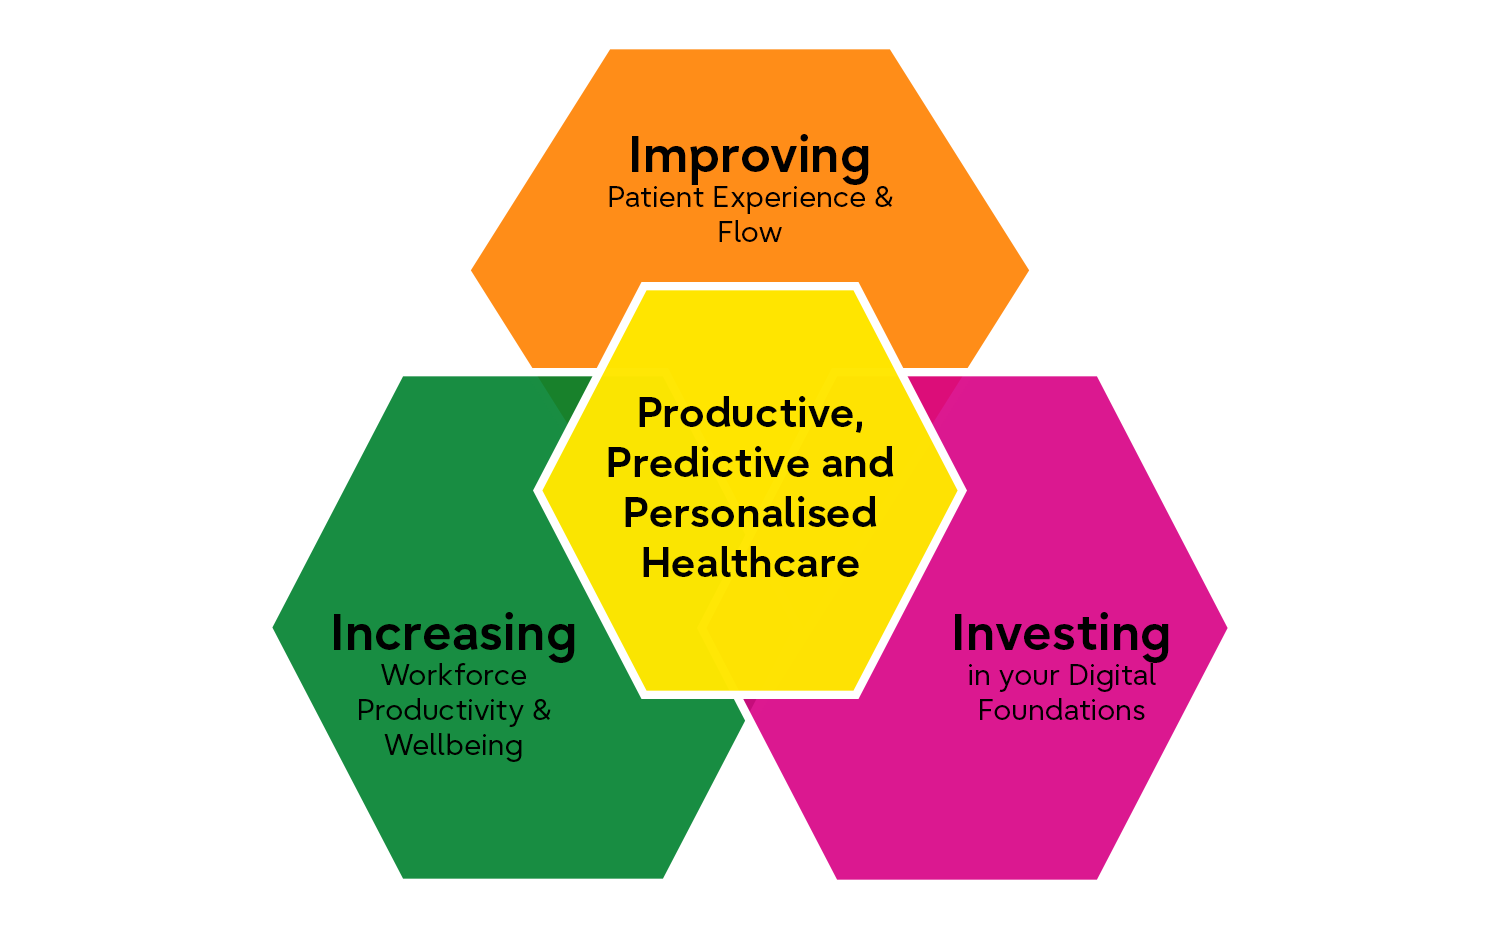 Productive, Predictive and Personalised Healthcare